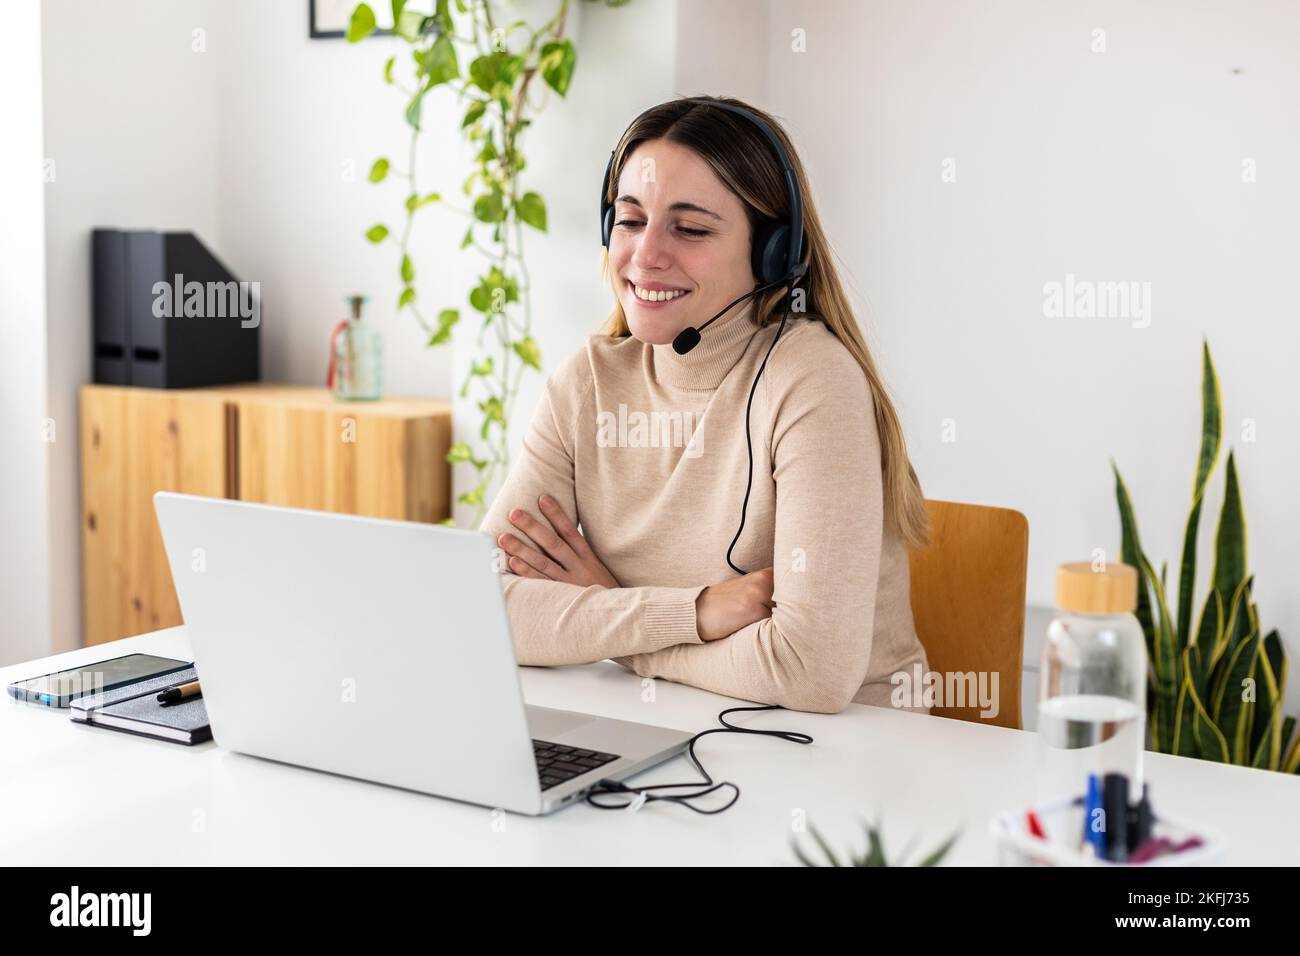 Young adult business woman with headset working on laptop at home office Stock Photo